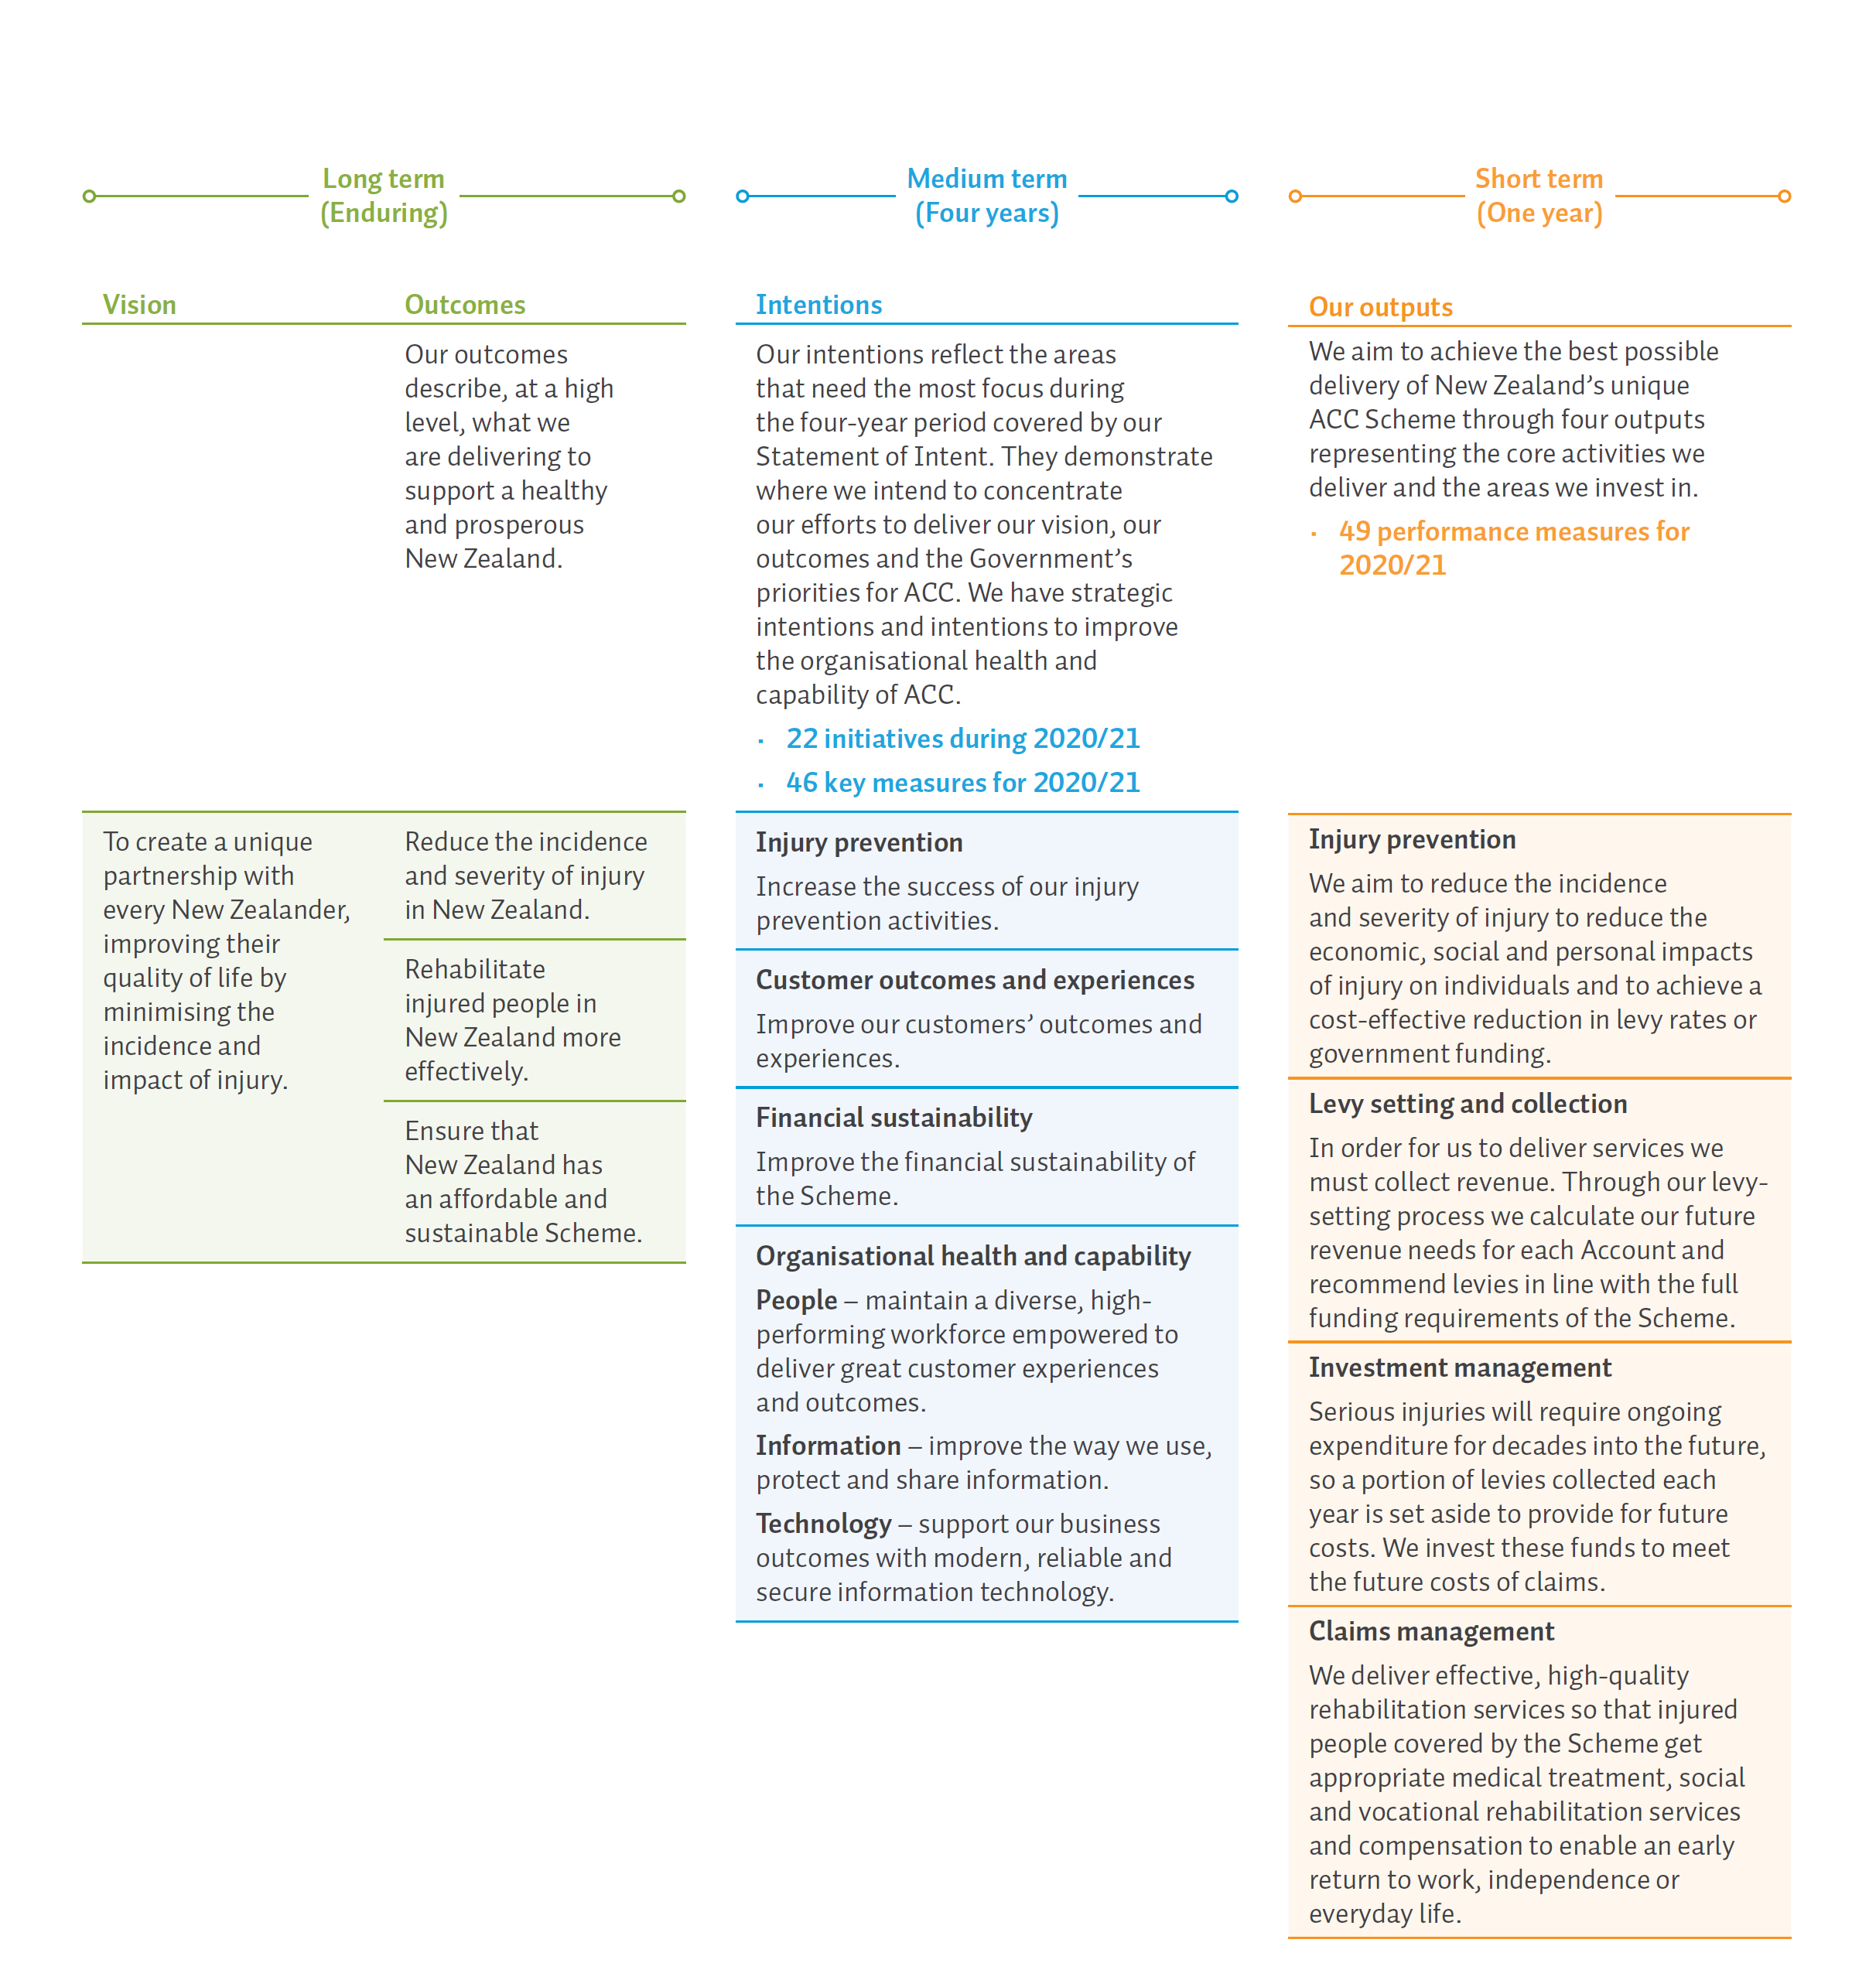 An image of the Accident Compensation Corporation’s performance framework from its 2020/21 Annual Report. 